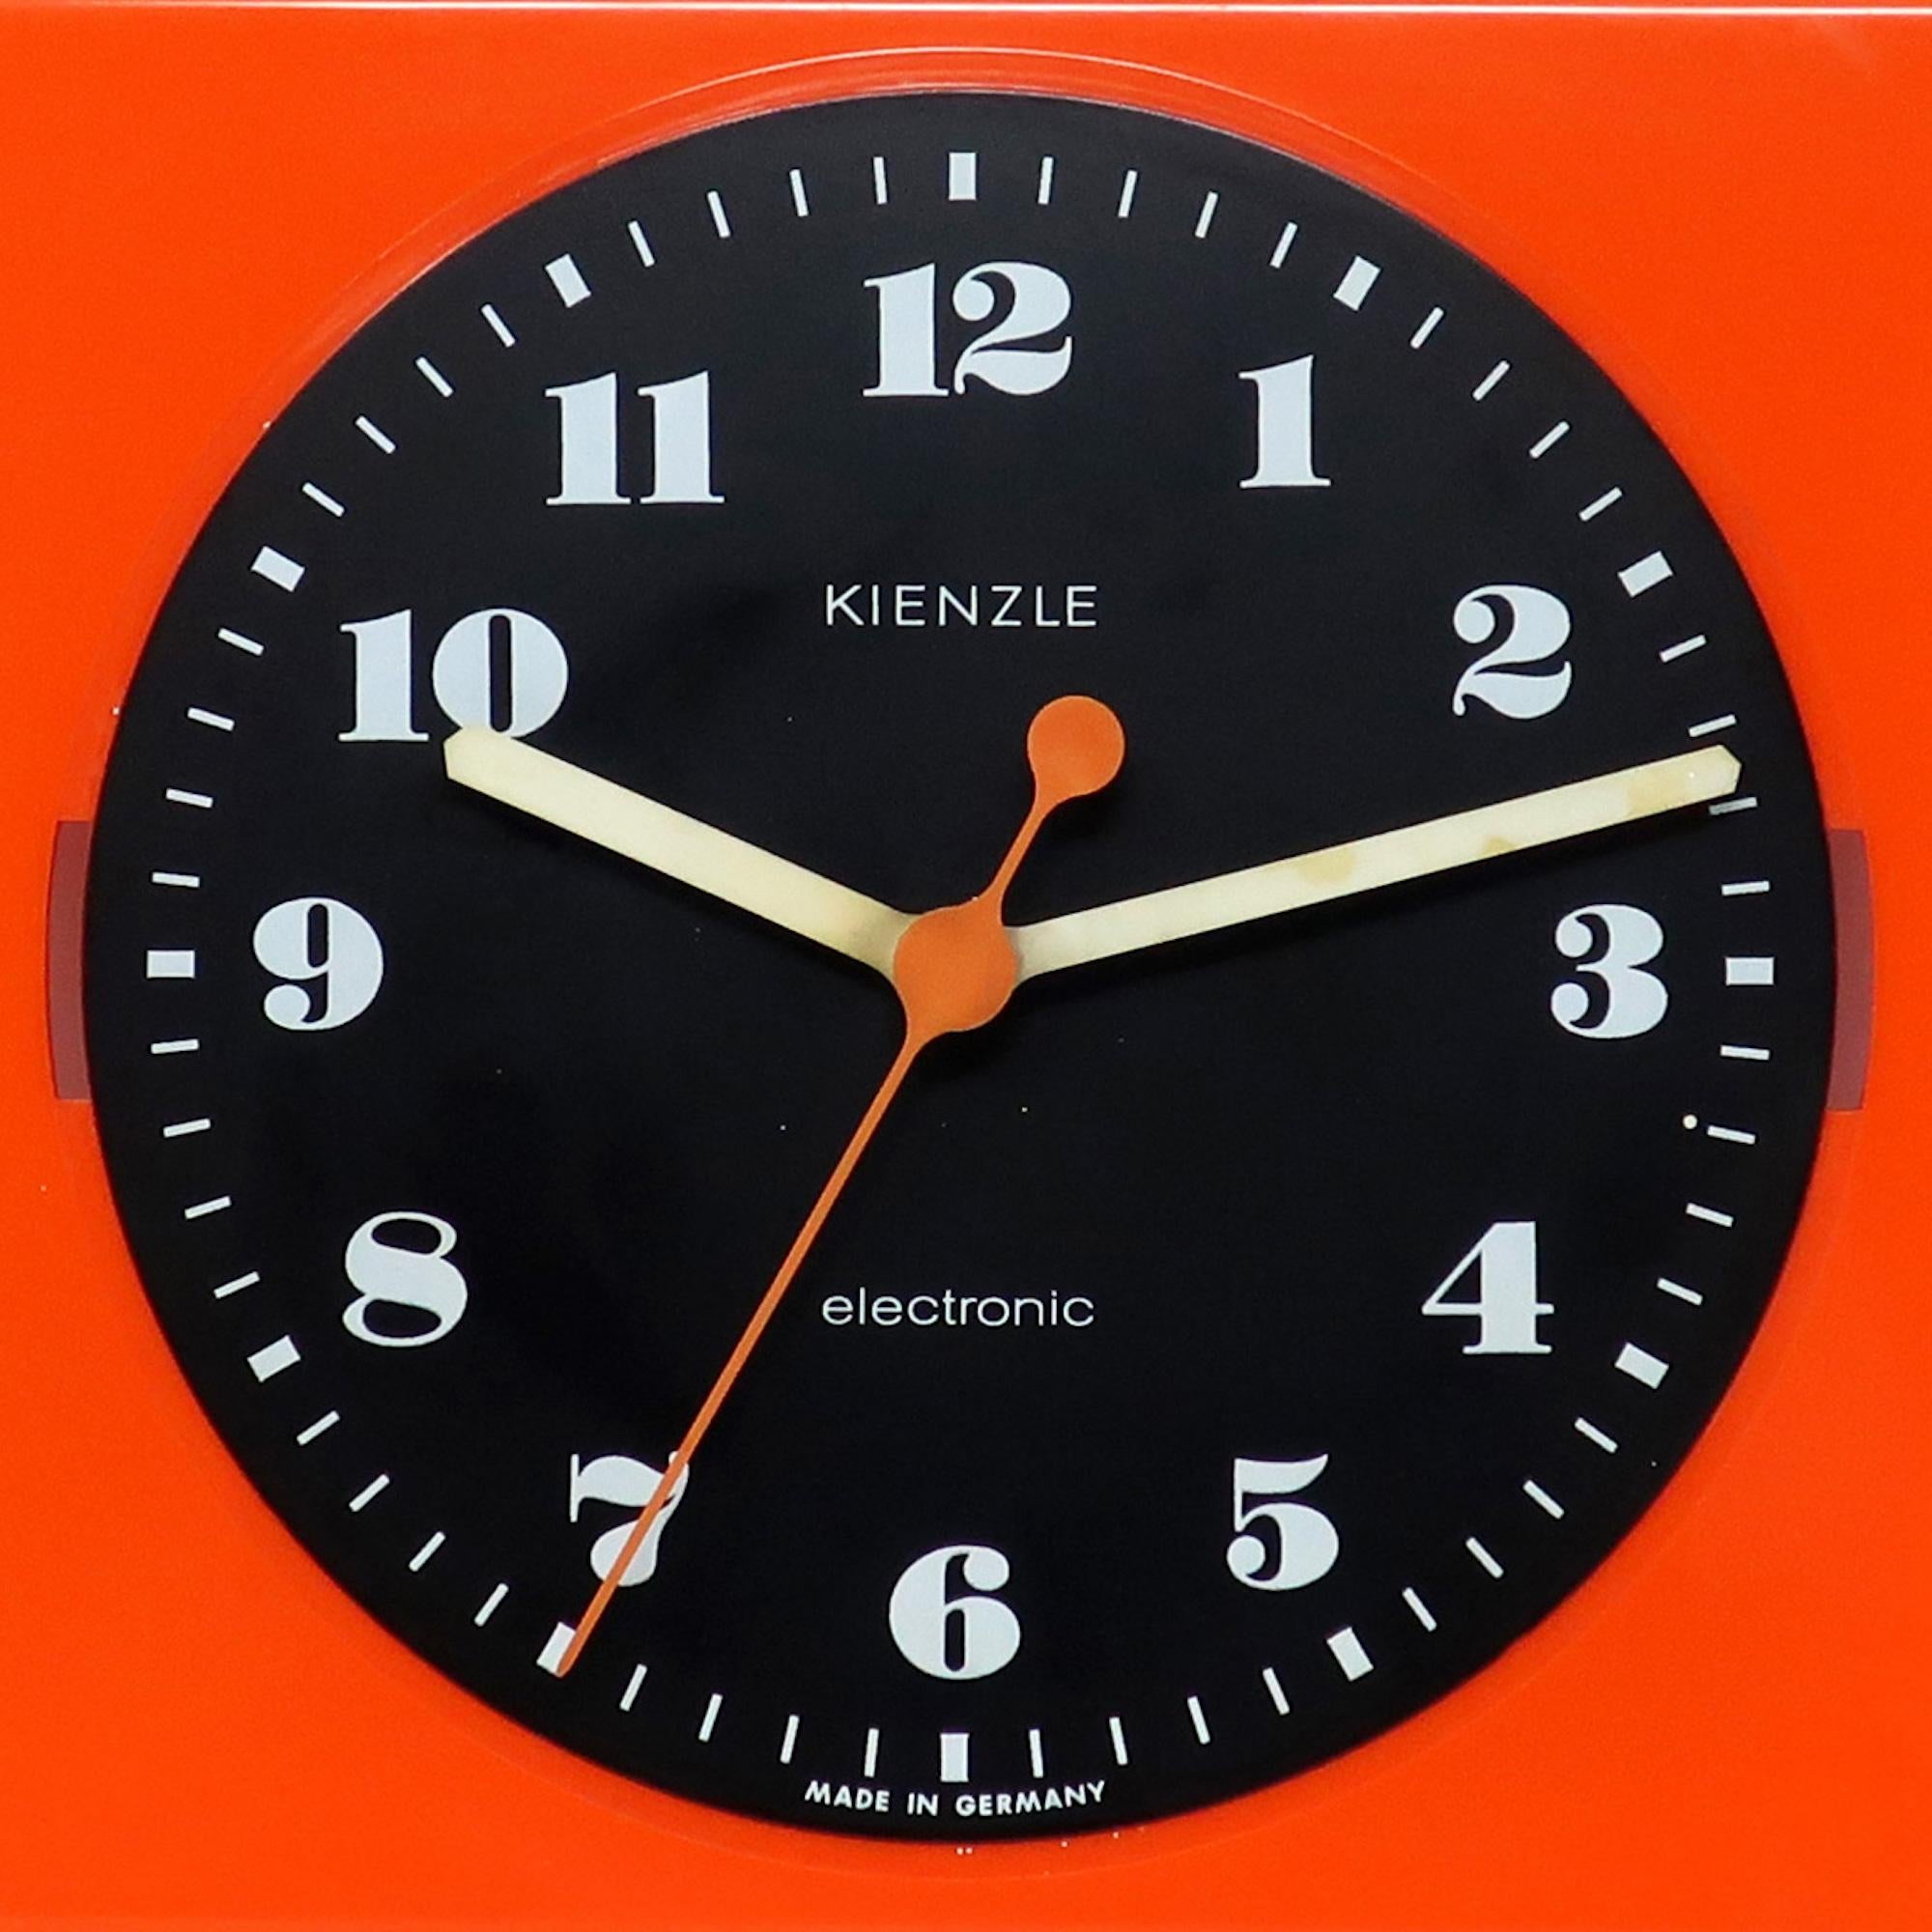 A vintage mid-century modern orange, black, and white Electronic wall clock by German clock manufacturer Kienzle. Body of this Space Age clock is orange plastic, the face is black, and the numbers and hands are white, all of which provides a